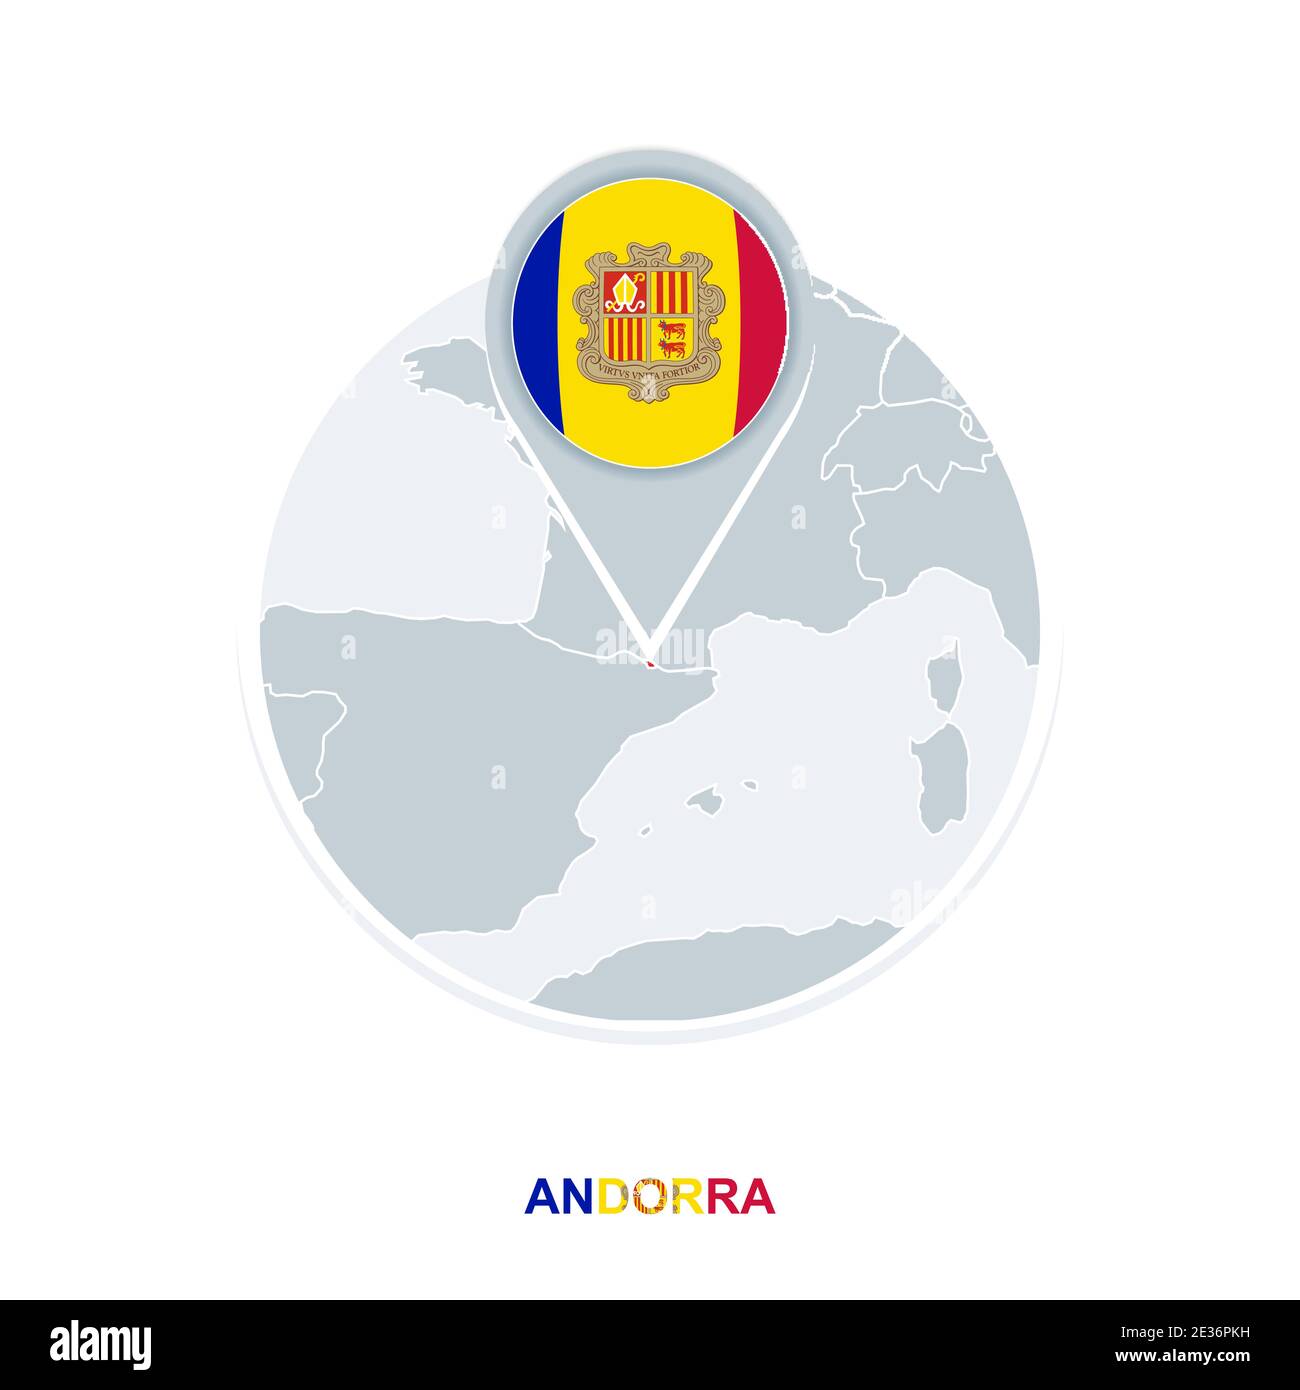 Andorra map and flag, vector map icon with highlighted Andorra Stock Vector